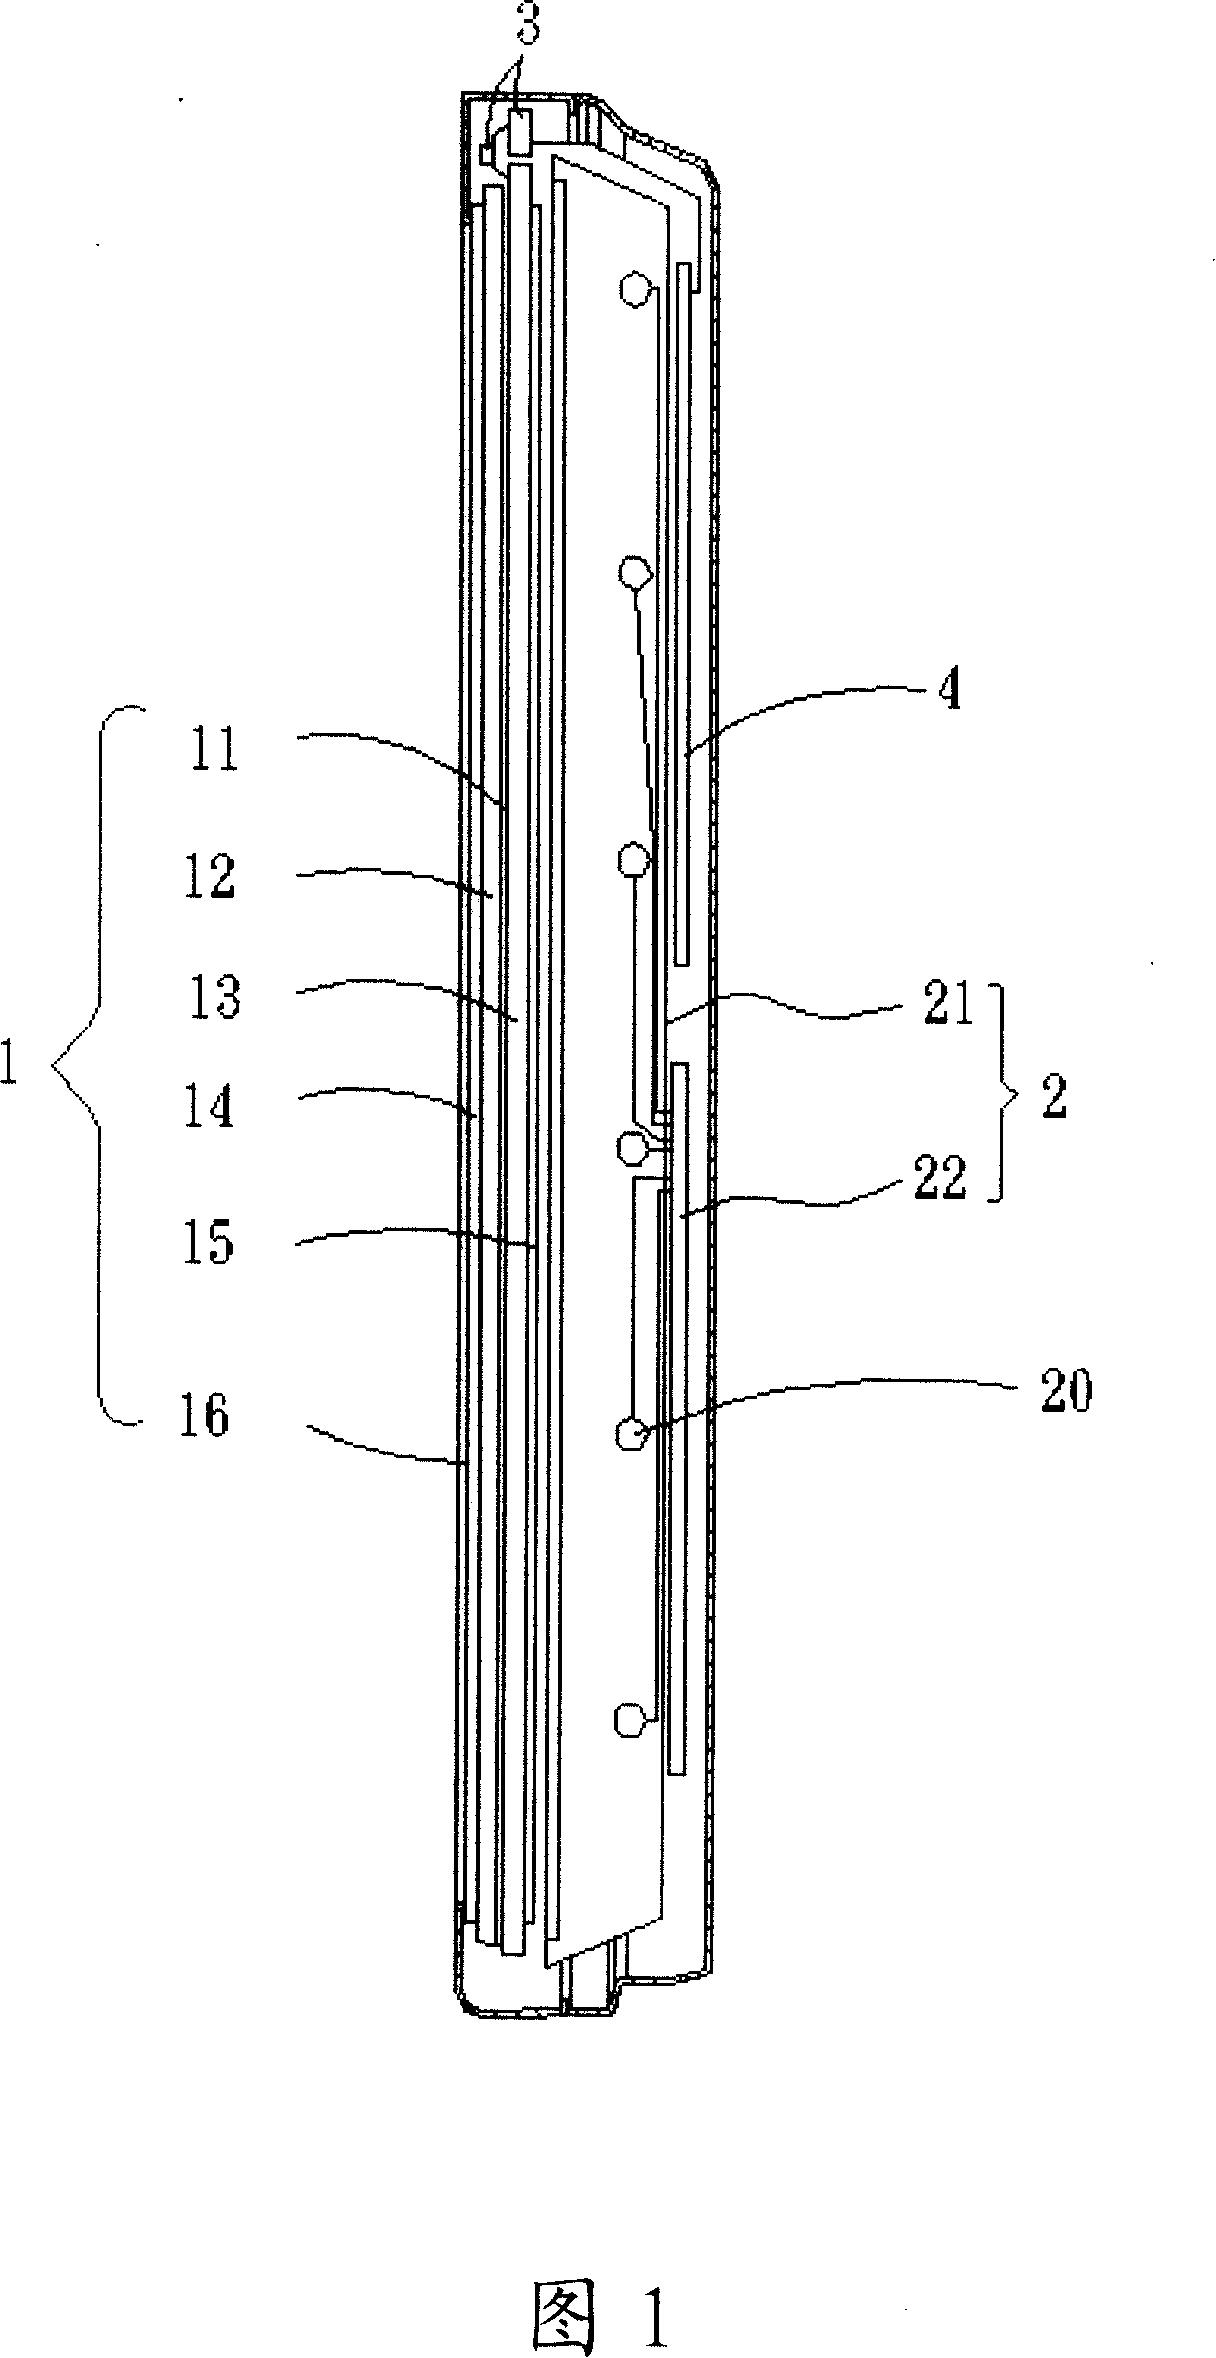 Image display driving method for LCD device